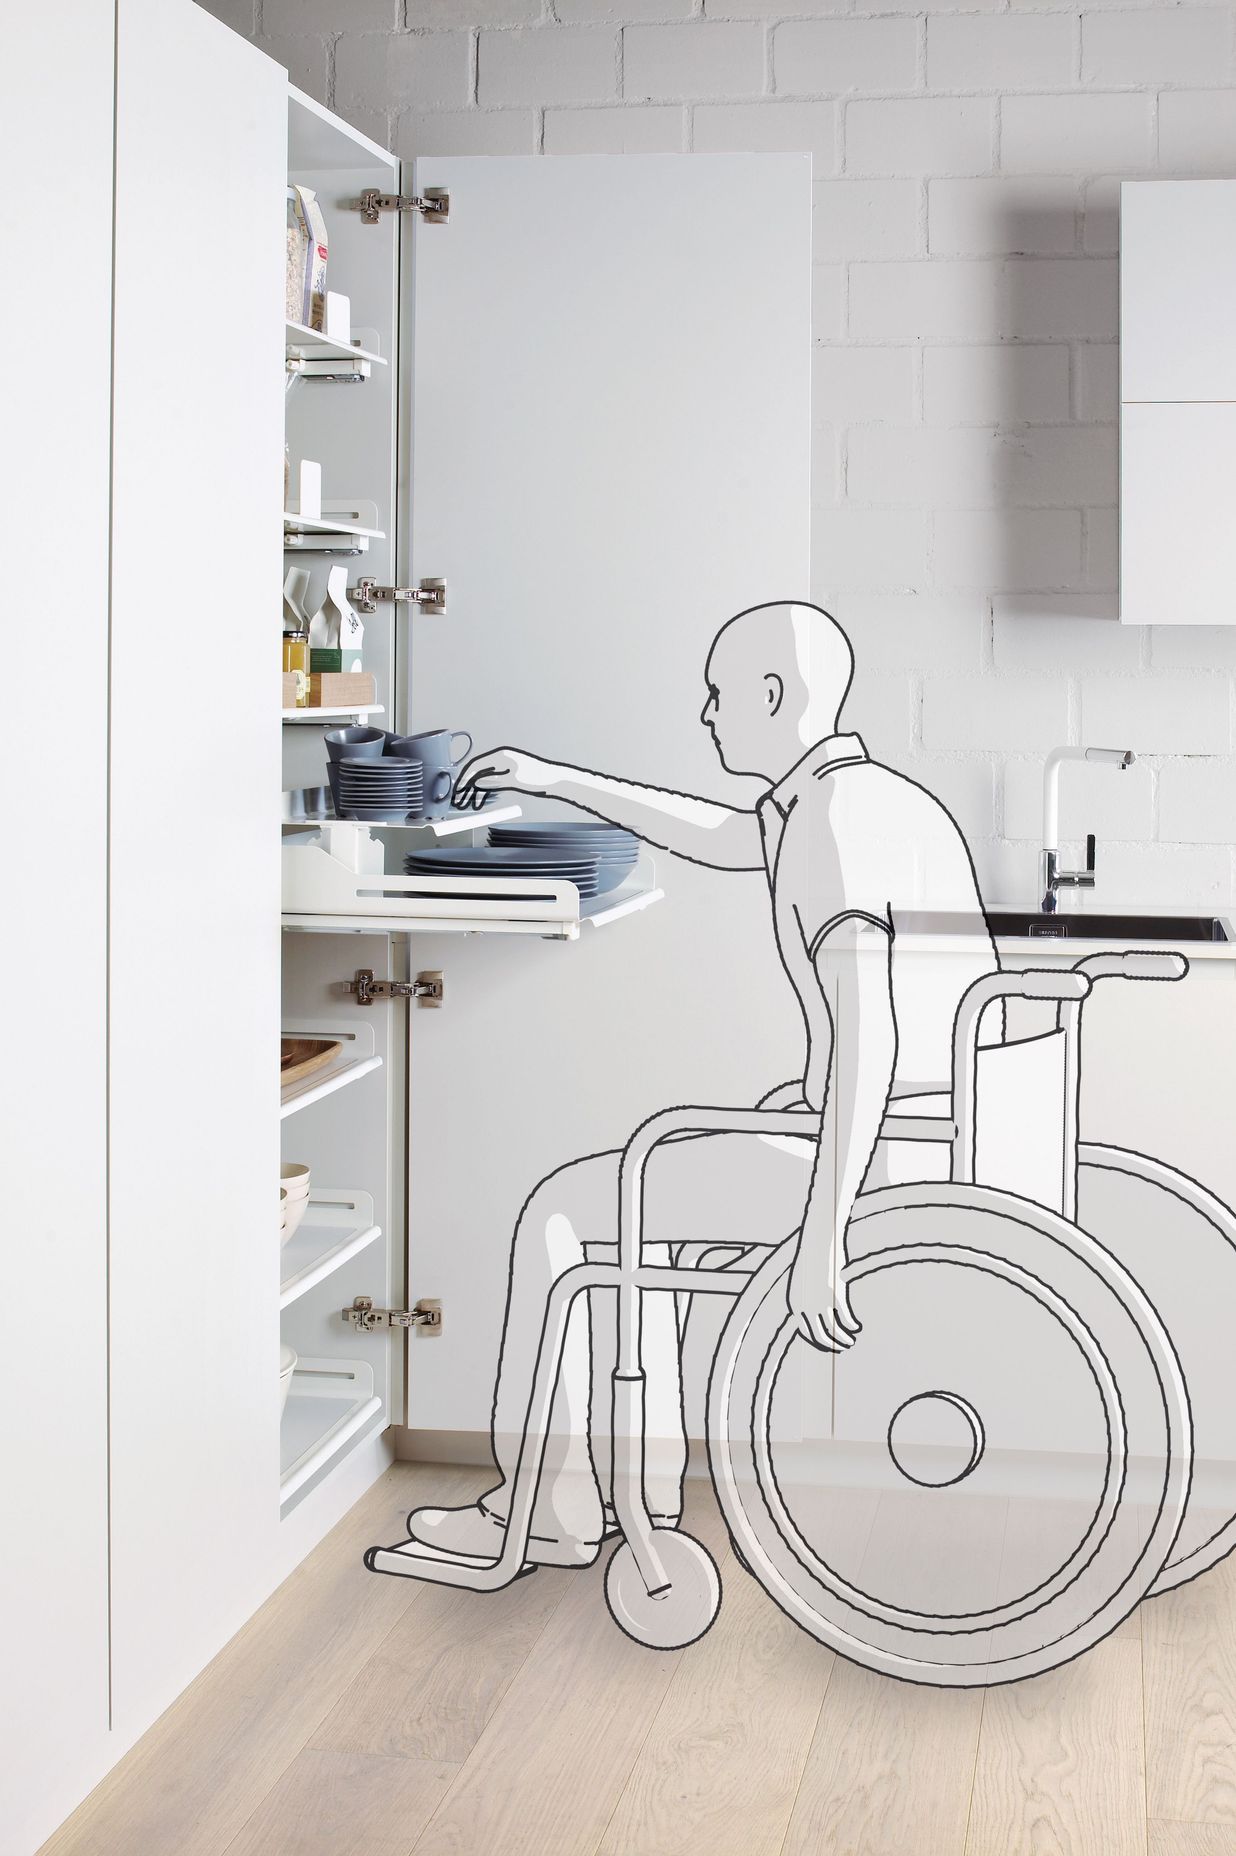 LIVING IN PLACE - PLANNING FOR KITCHEN ACCESSIBILITY